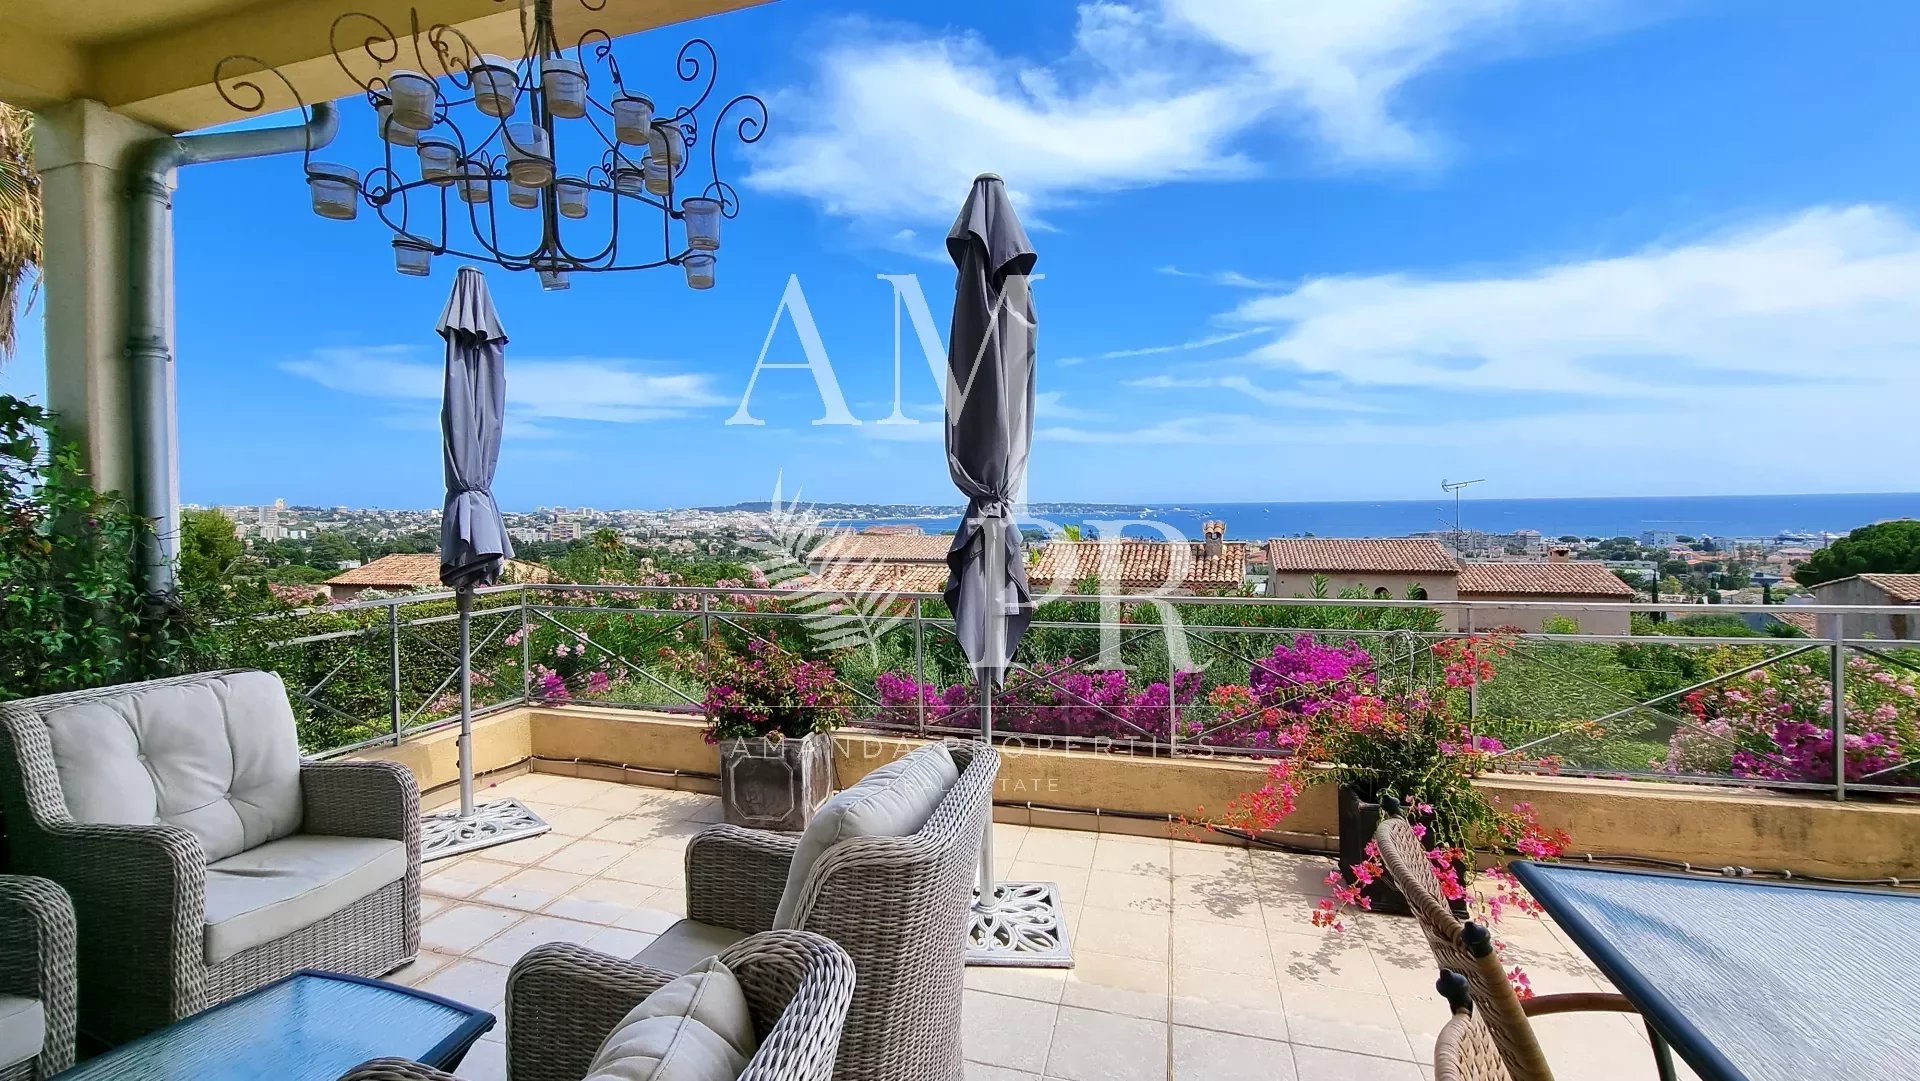 Charming villa on gated estate with sea view near beach